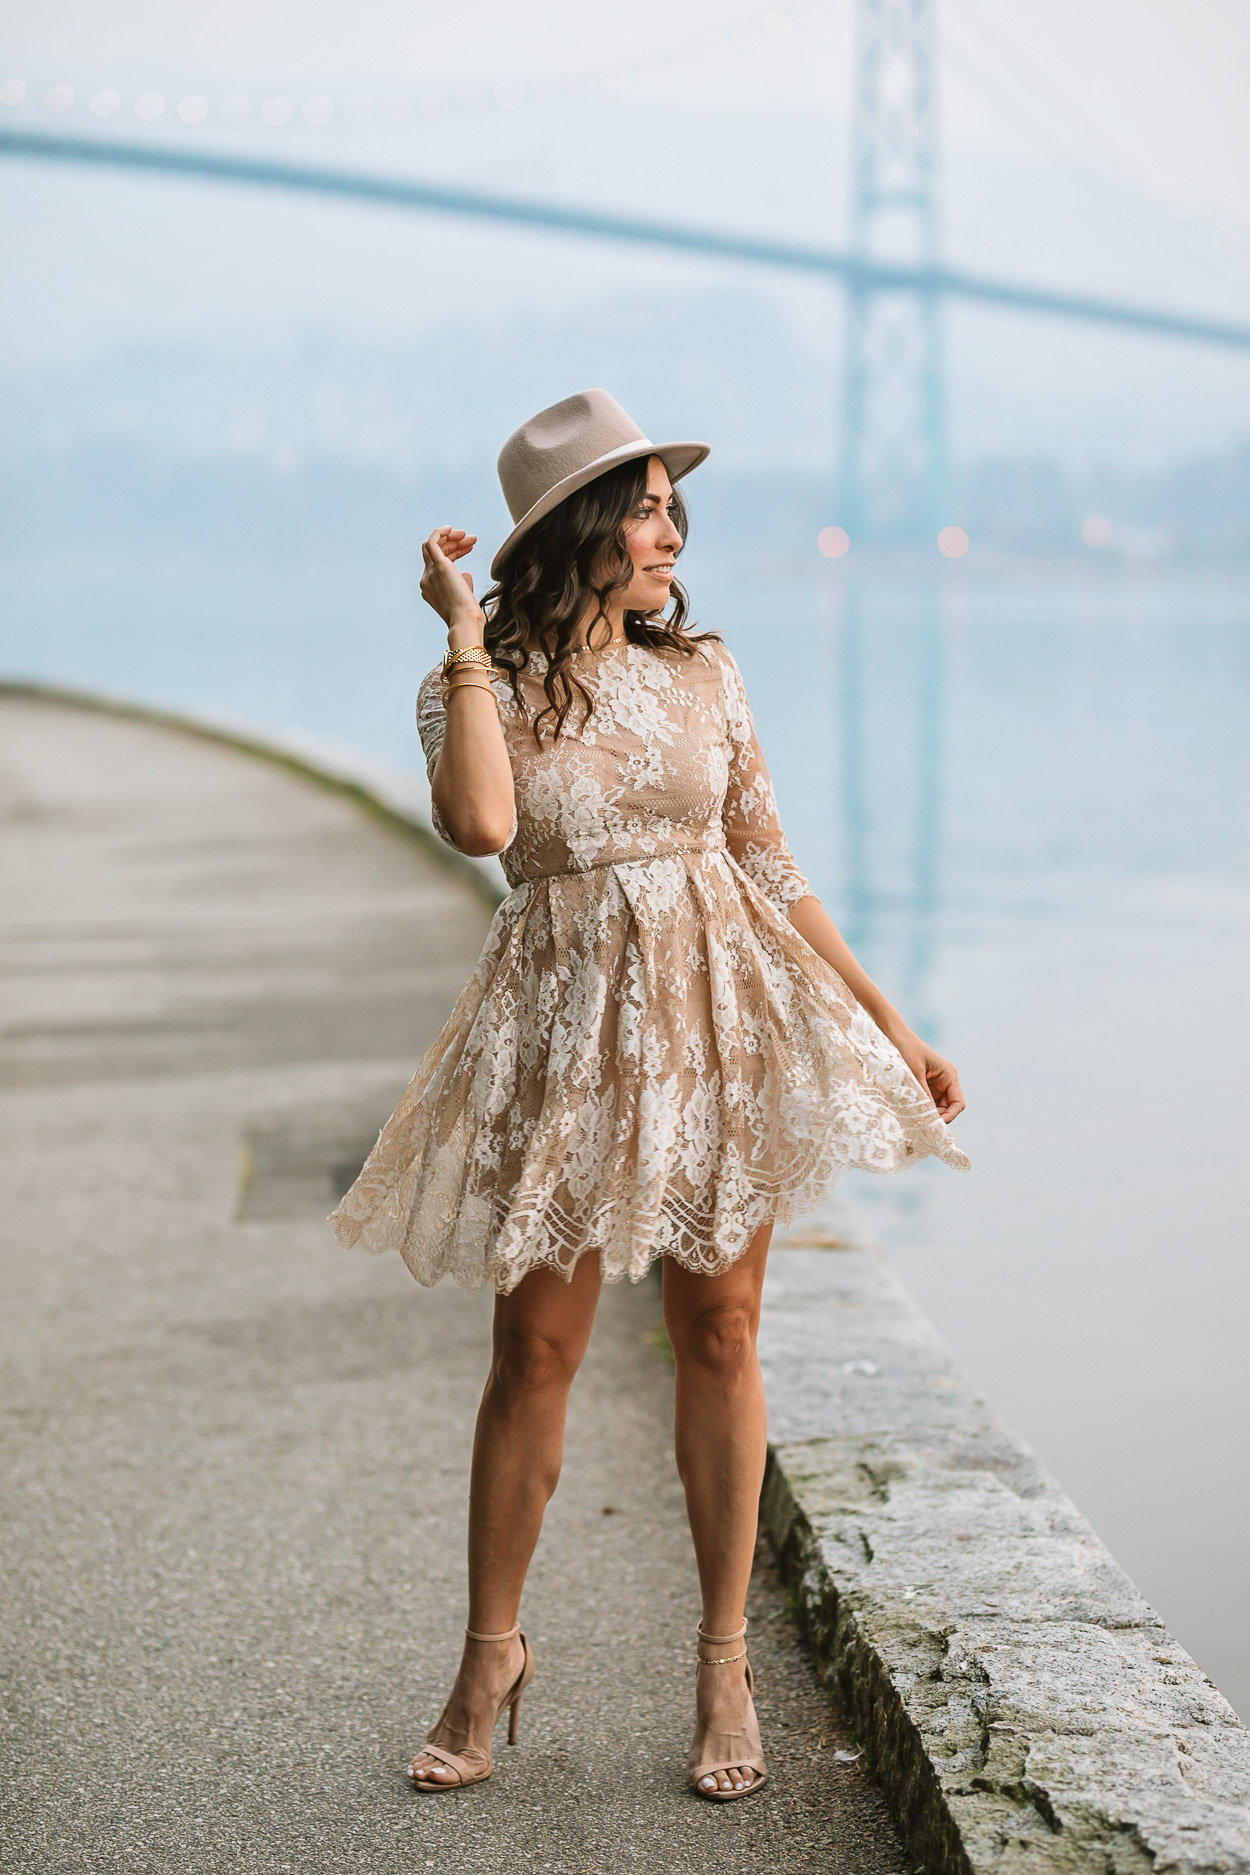 The best things to do in Vancouver in 24 hours selected by fashion blogger Amanda of A Glam Lifestyle, wearing Chicwish lace dress